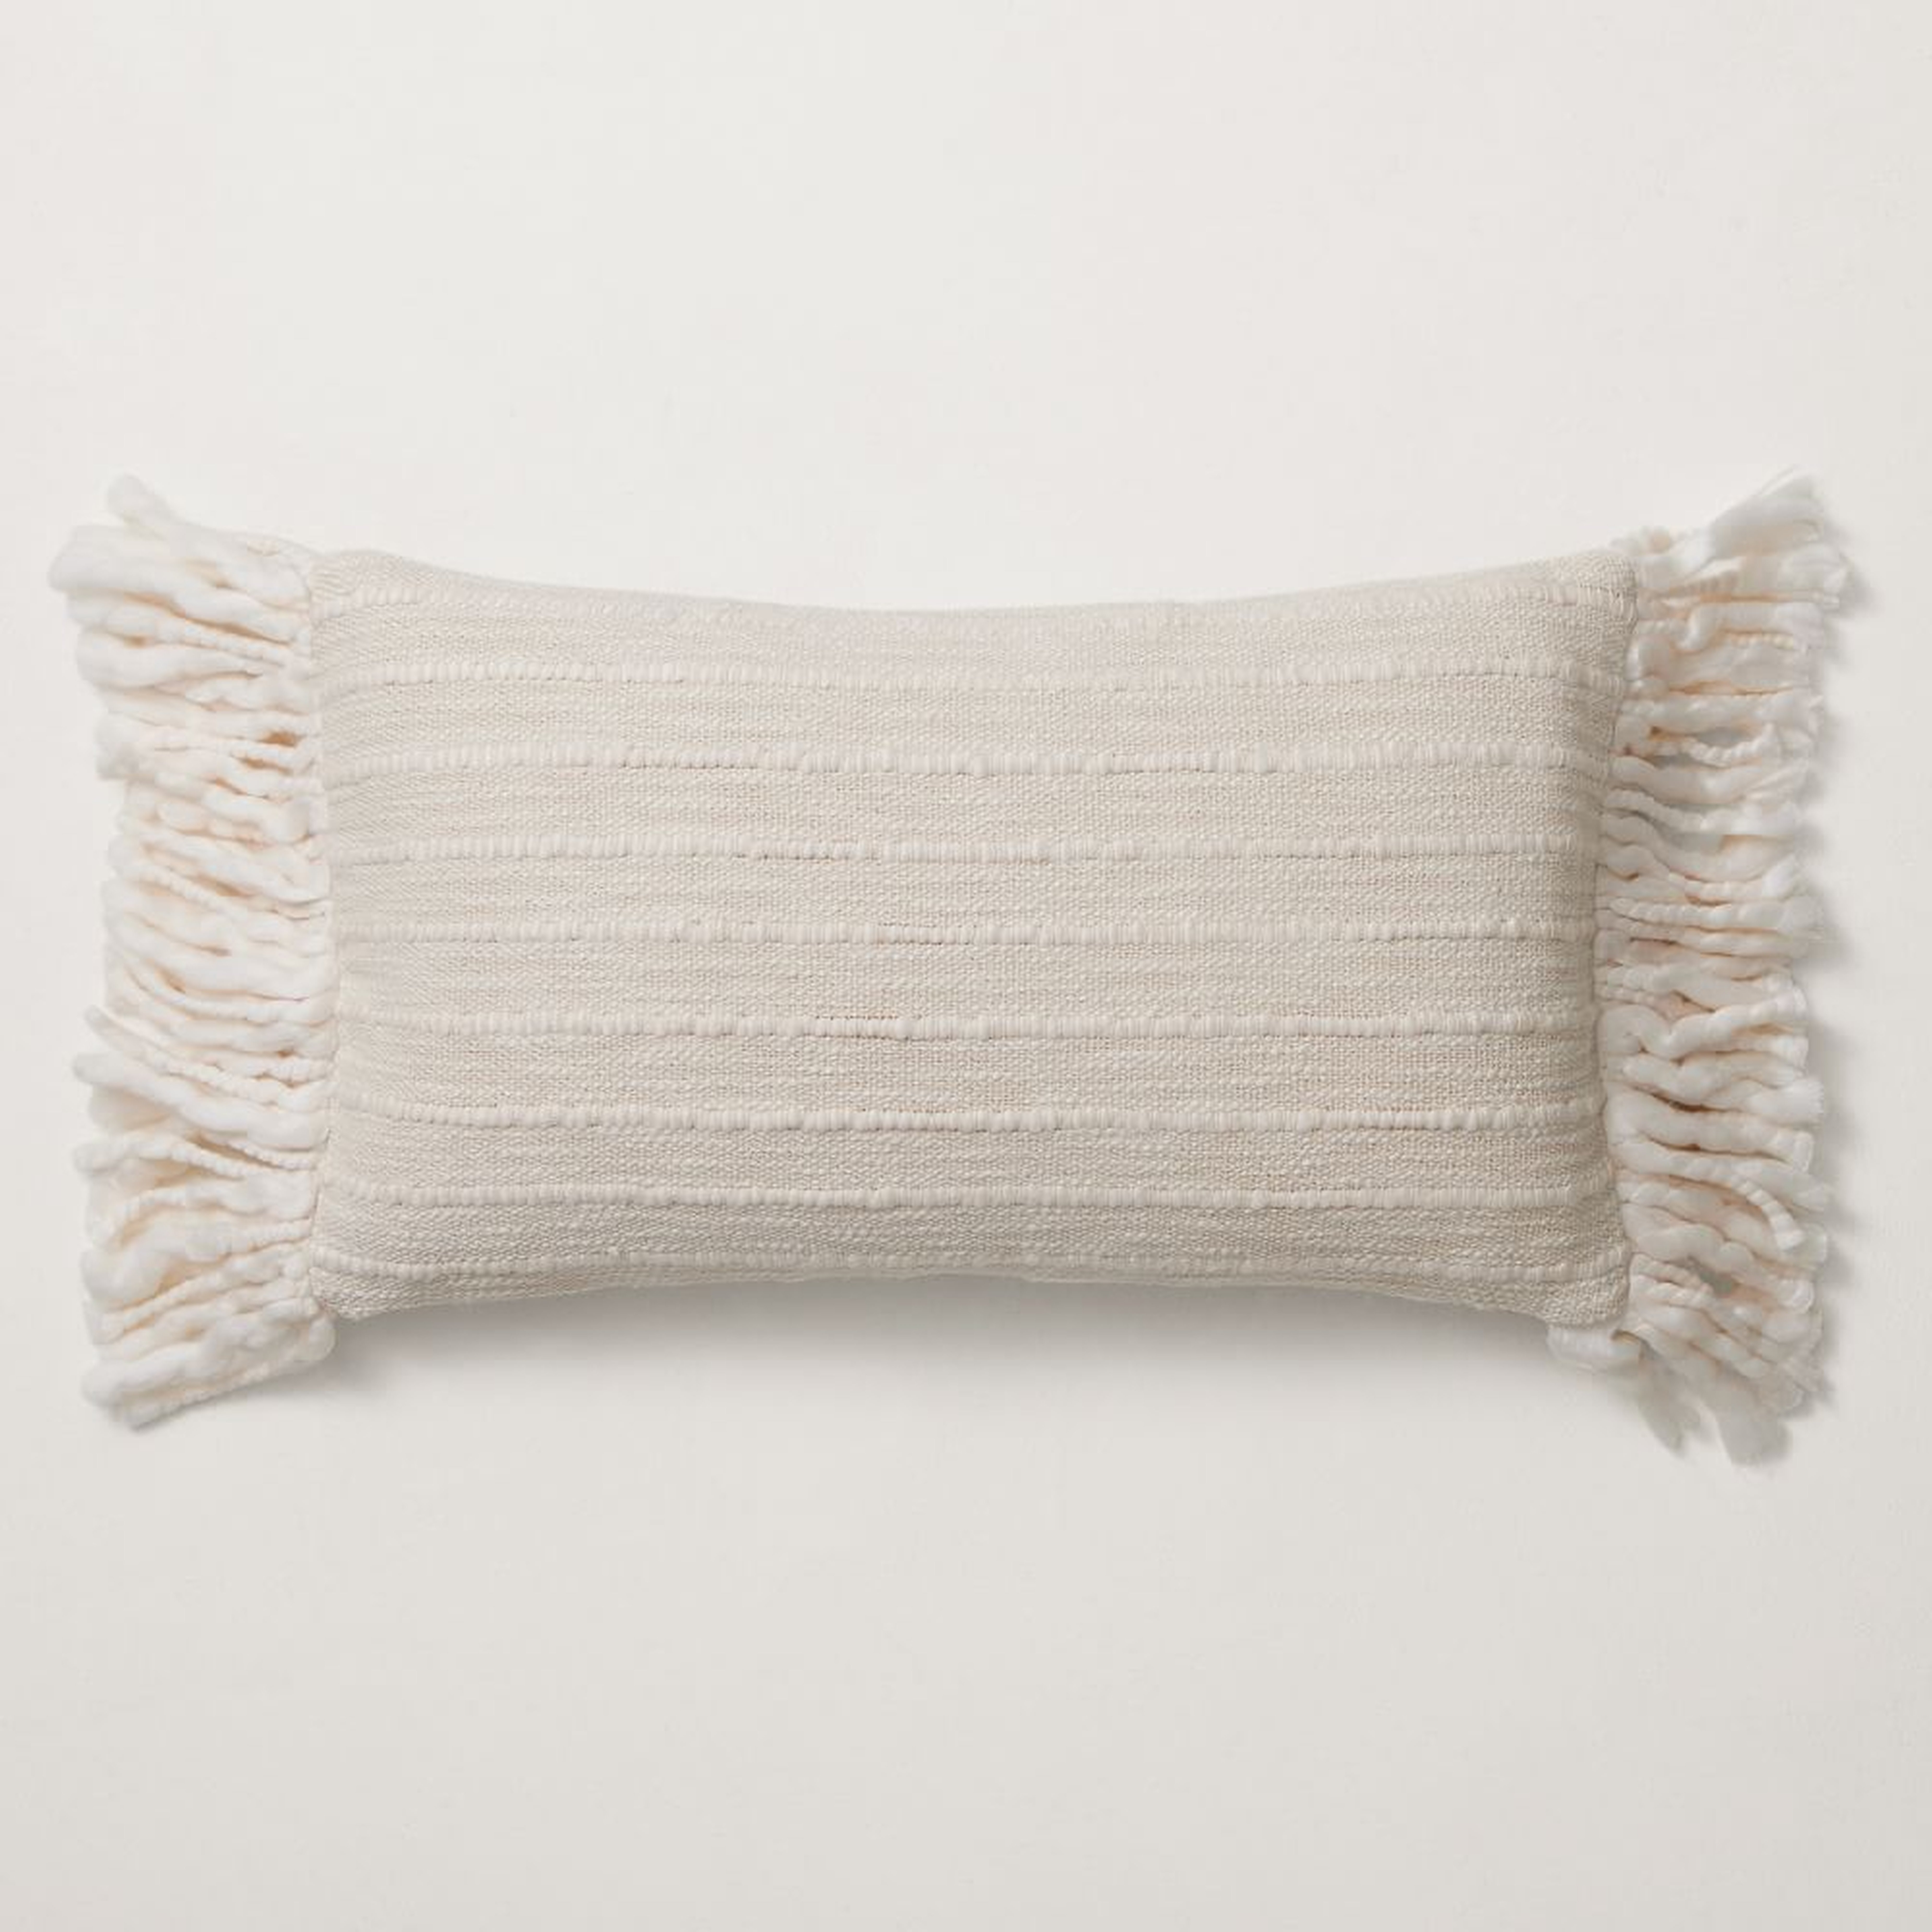 Soft Corded Chunky Fringe Pillow Cover, 12"x21", Natural Canvas, Set of 2 - West Elm